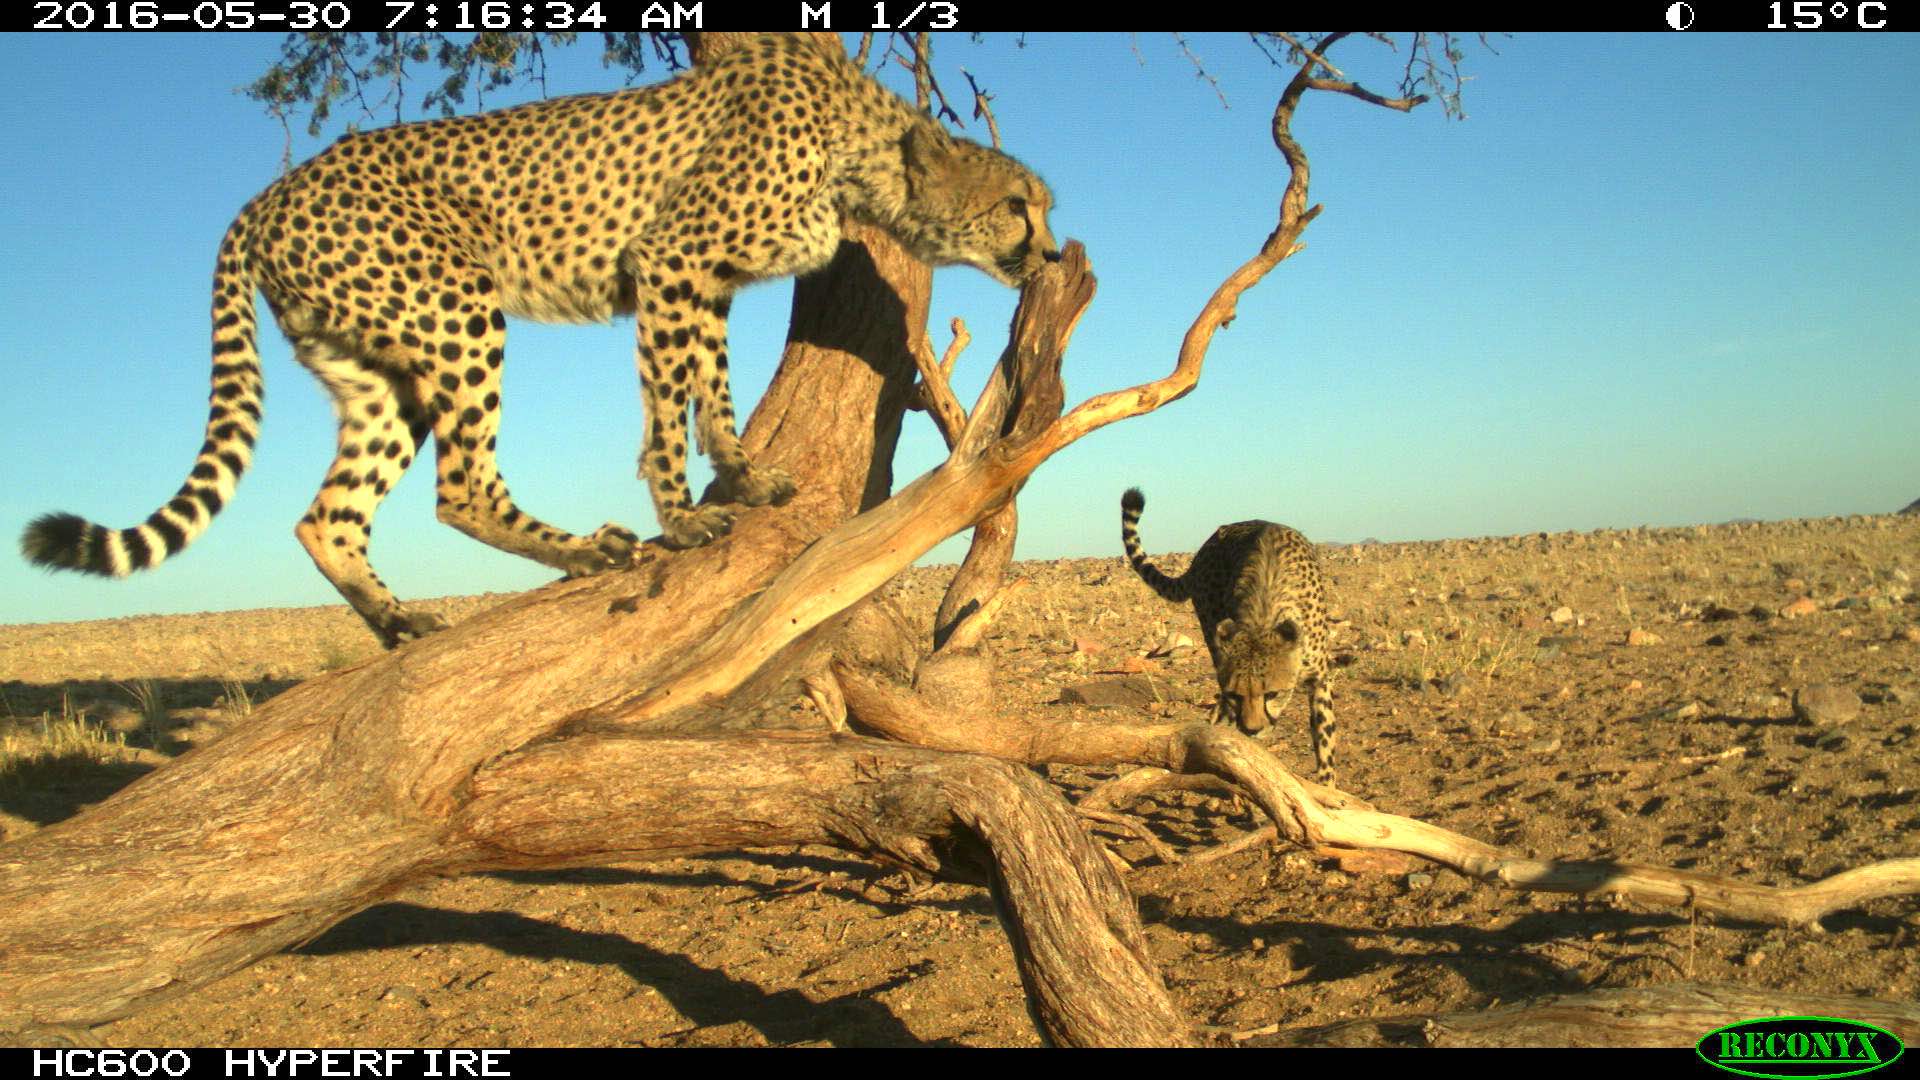 A camera trap photo showing two cheetahs clambering over a dead looking tree.